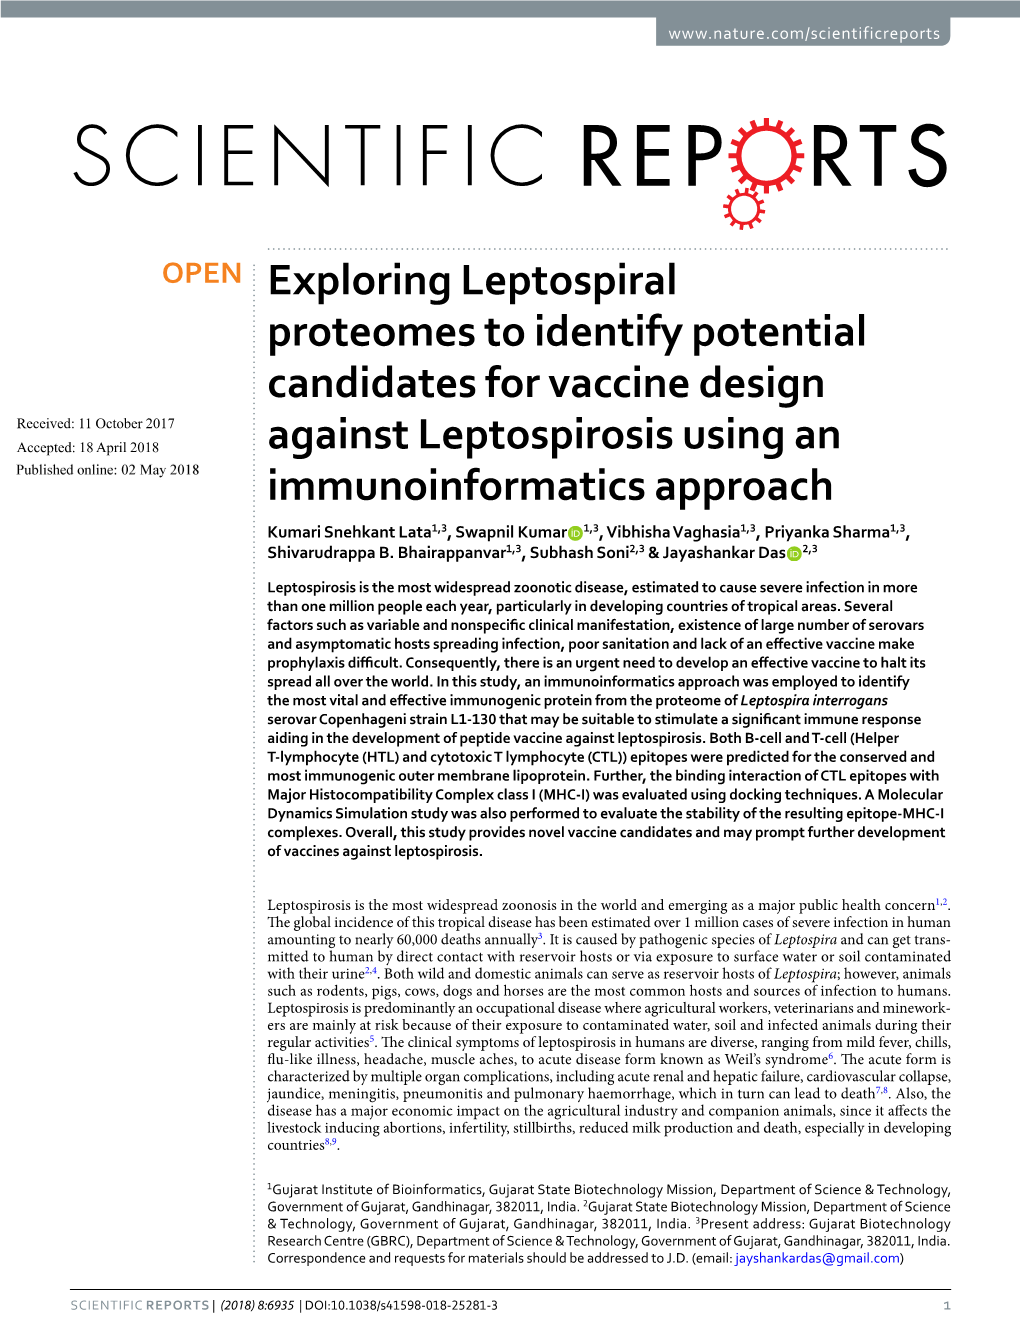 Exploring Leptospiral Proteomes to Identify Potential Candidates For